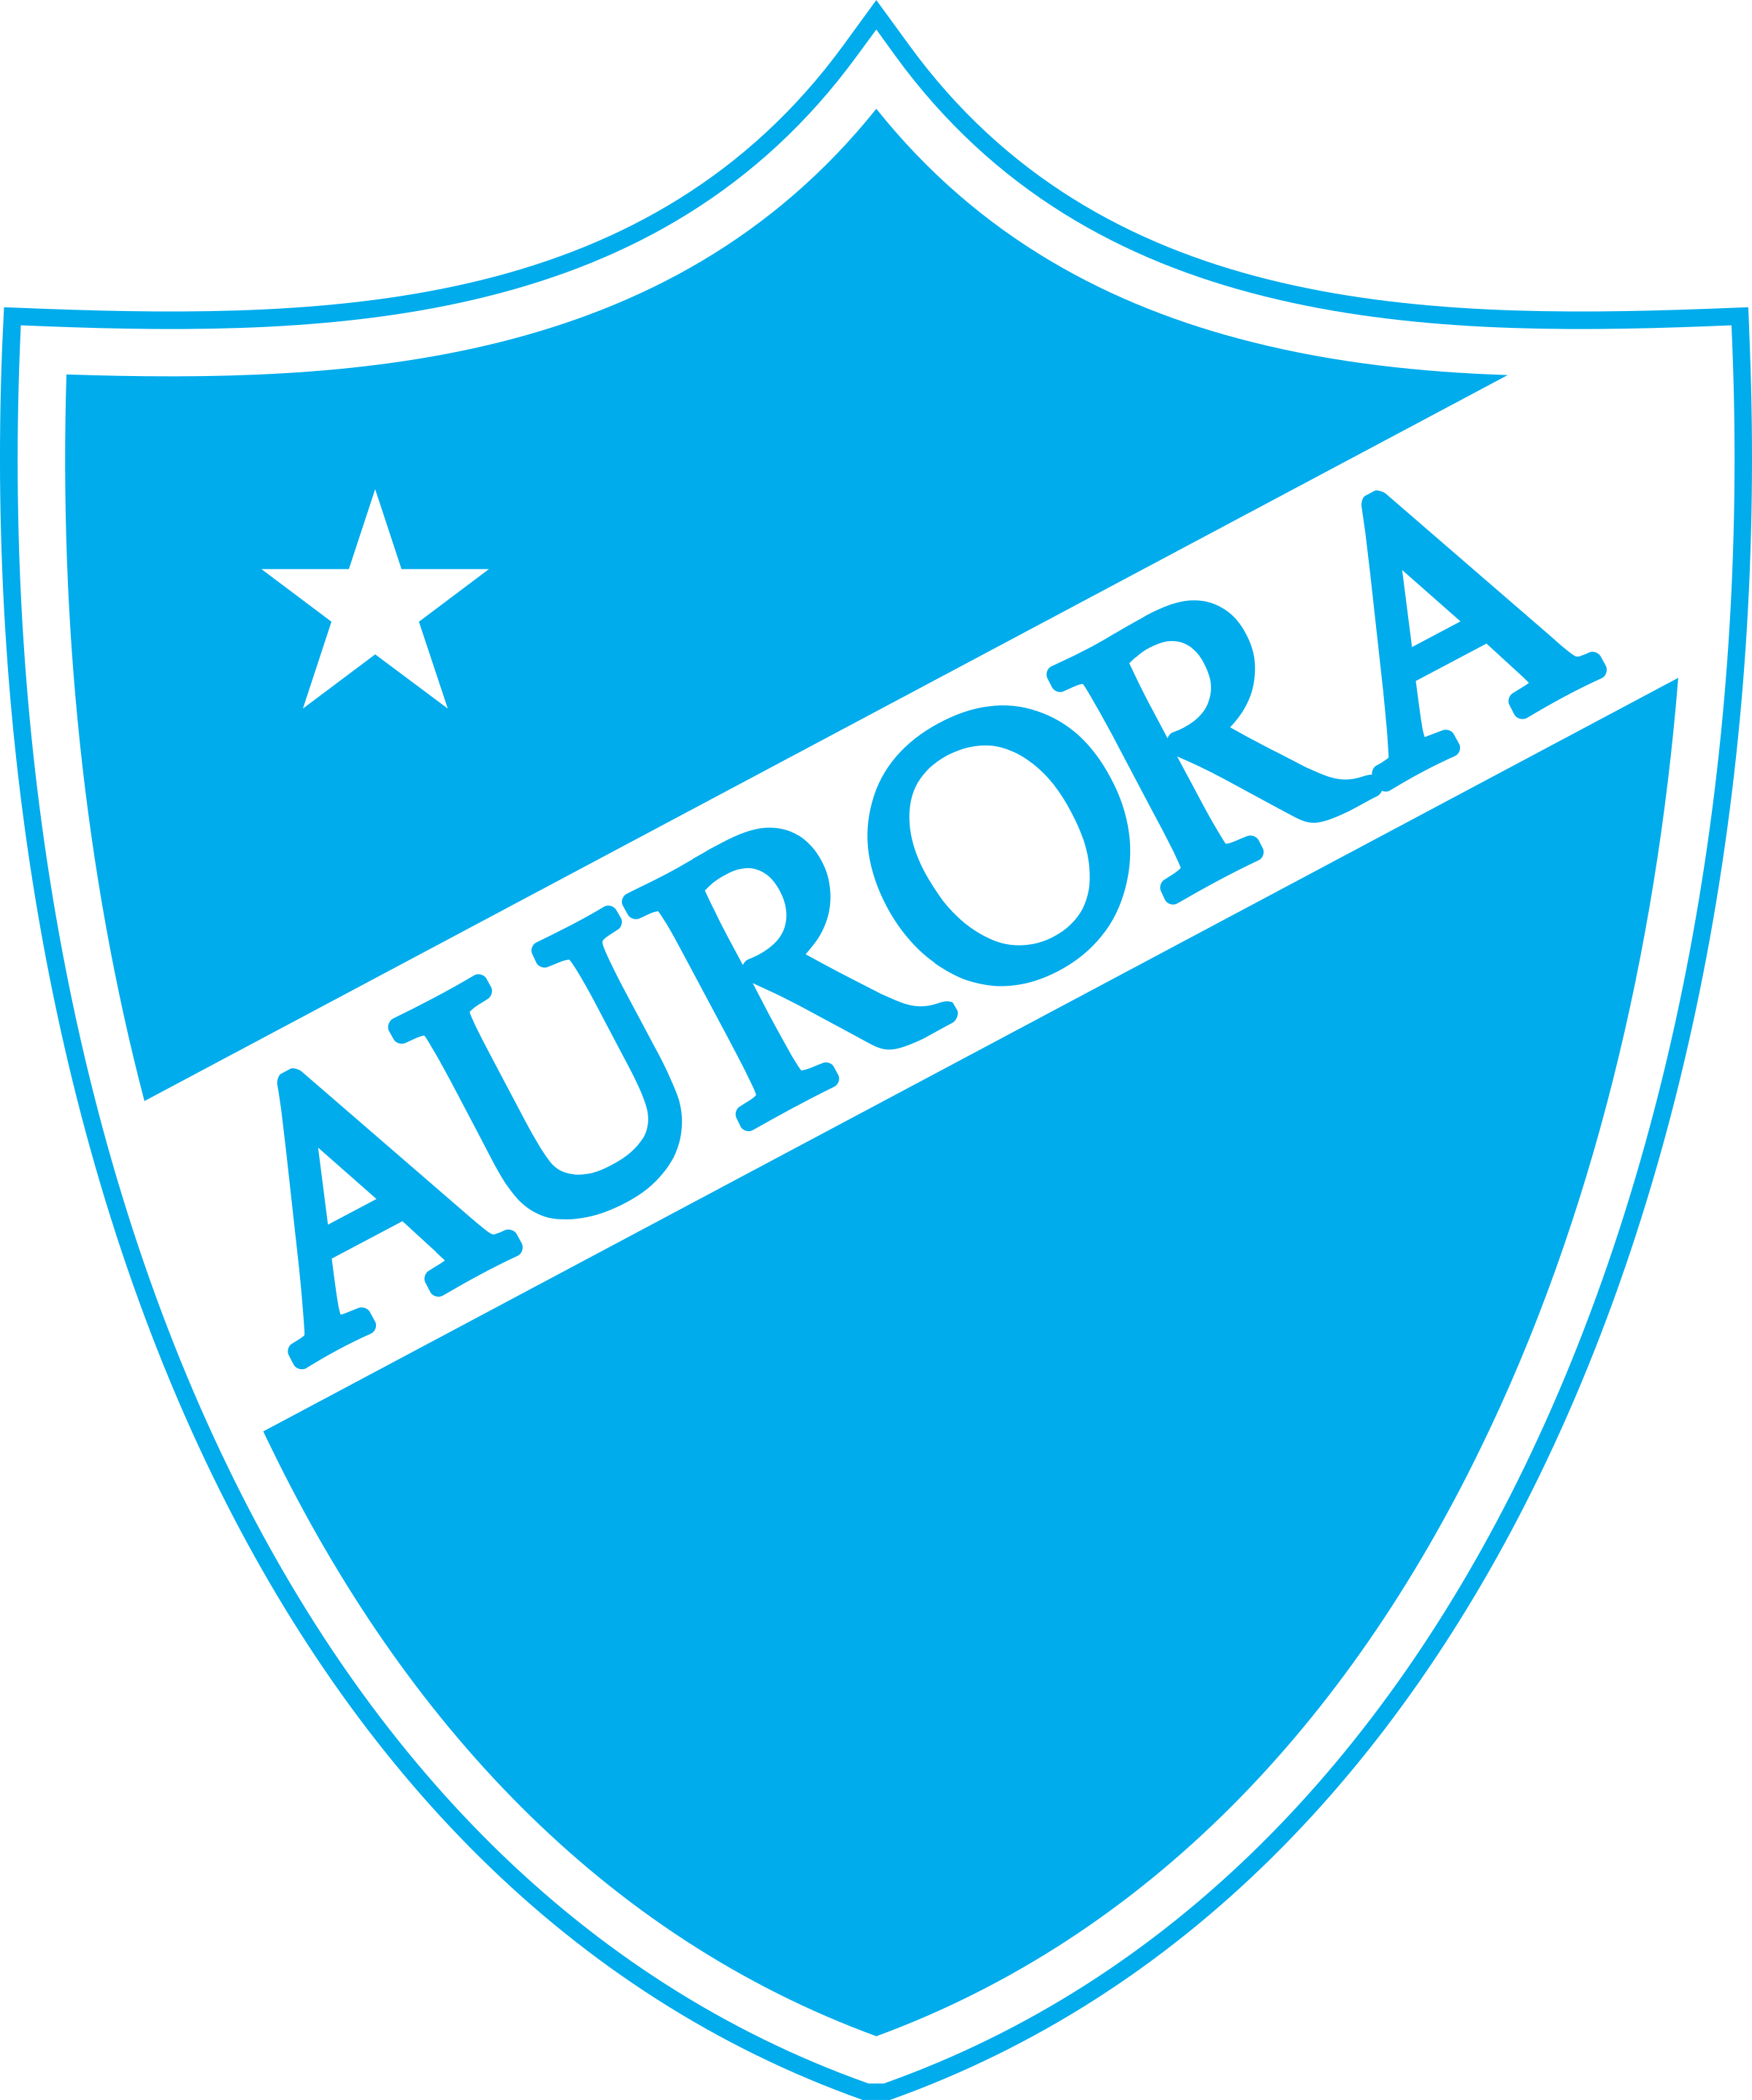 A Blue Shield With White Text